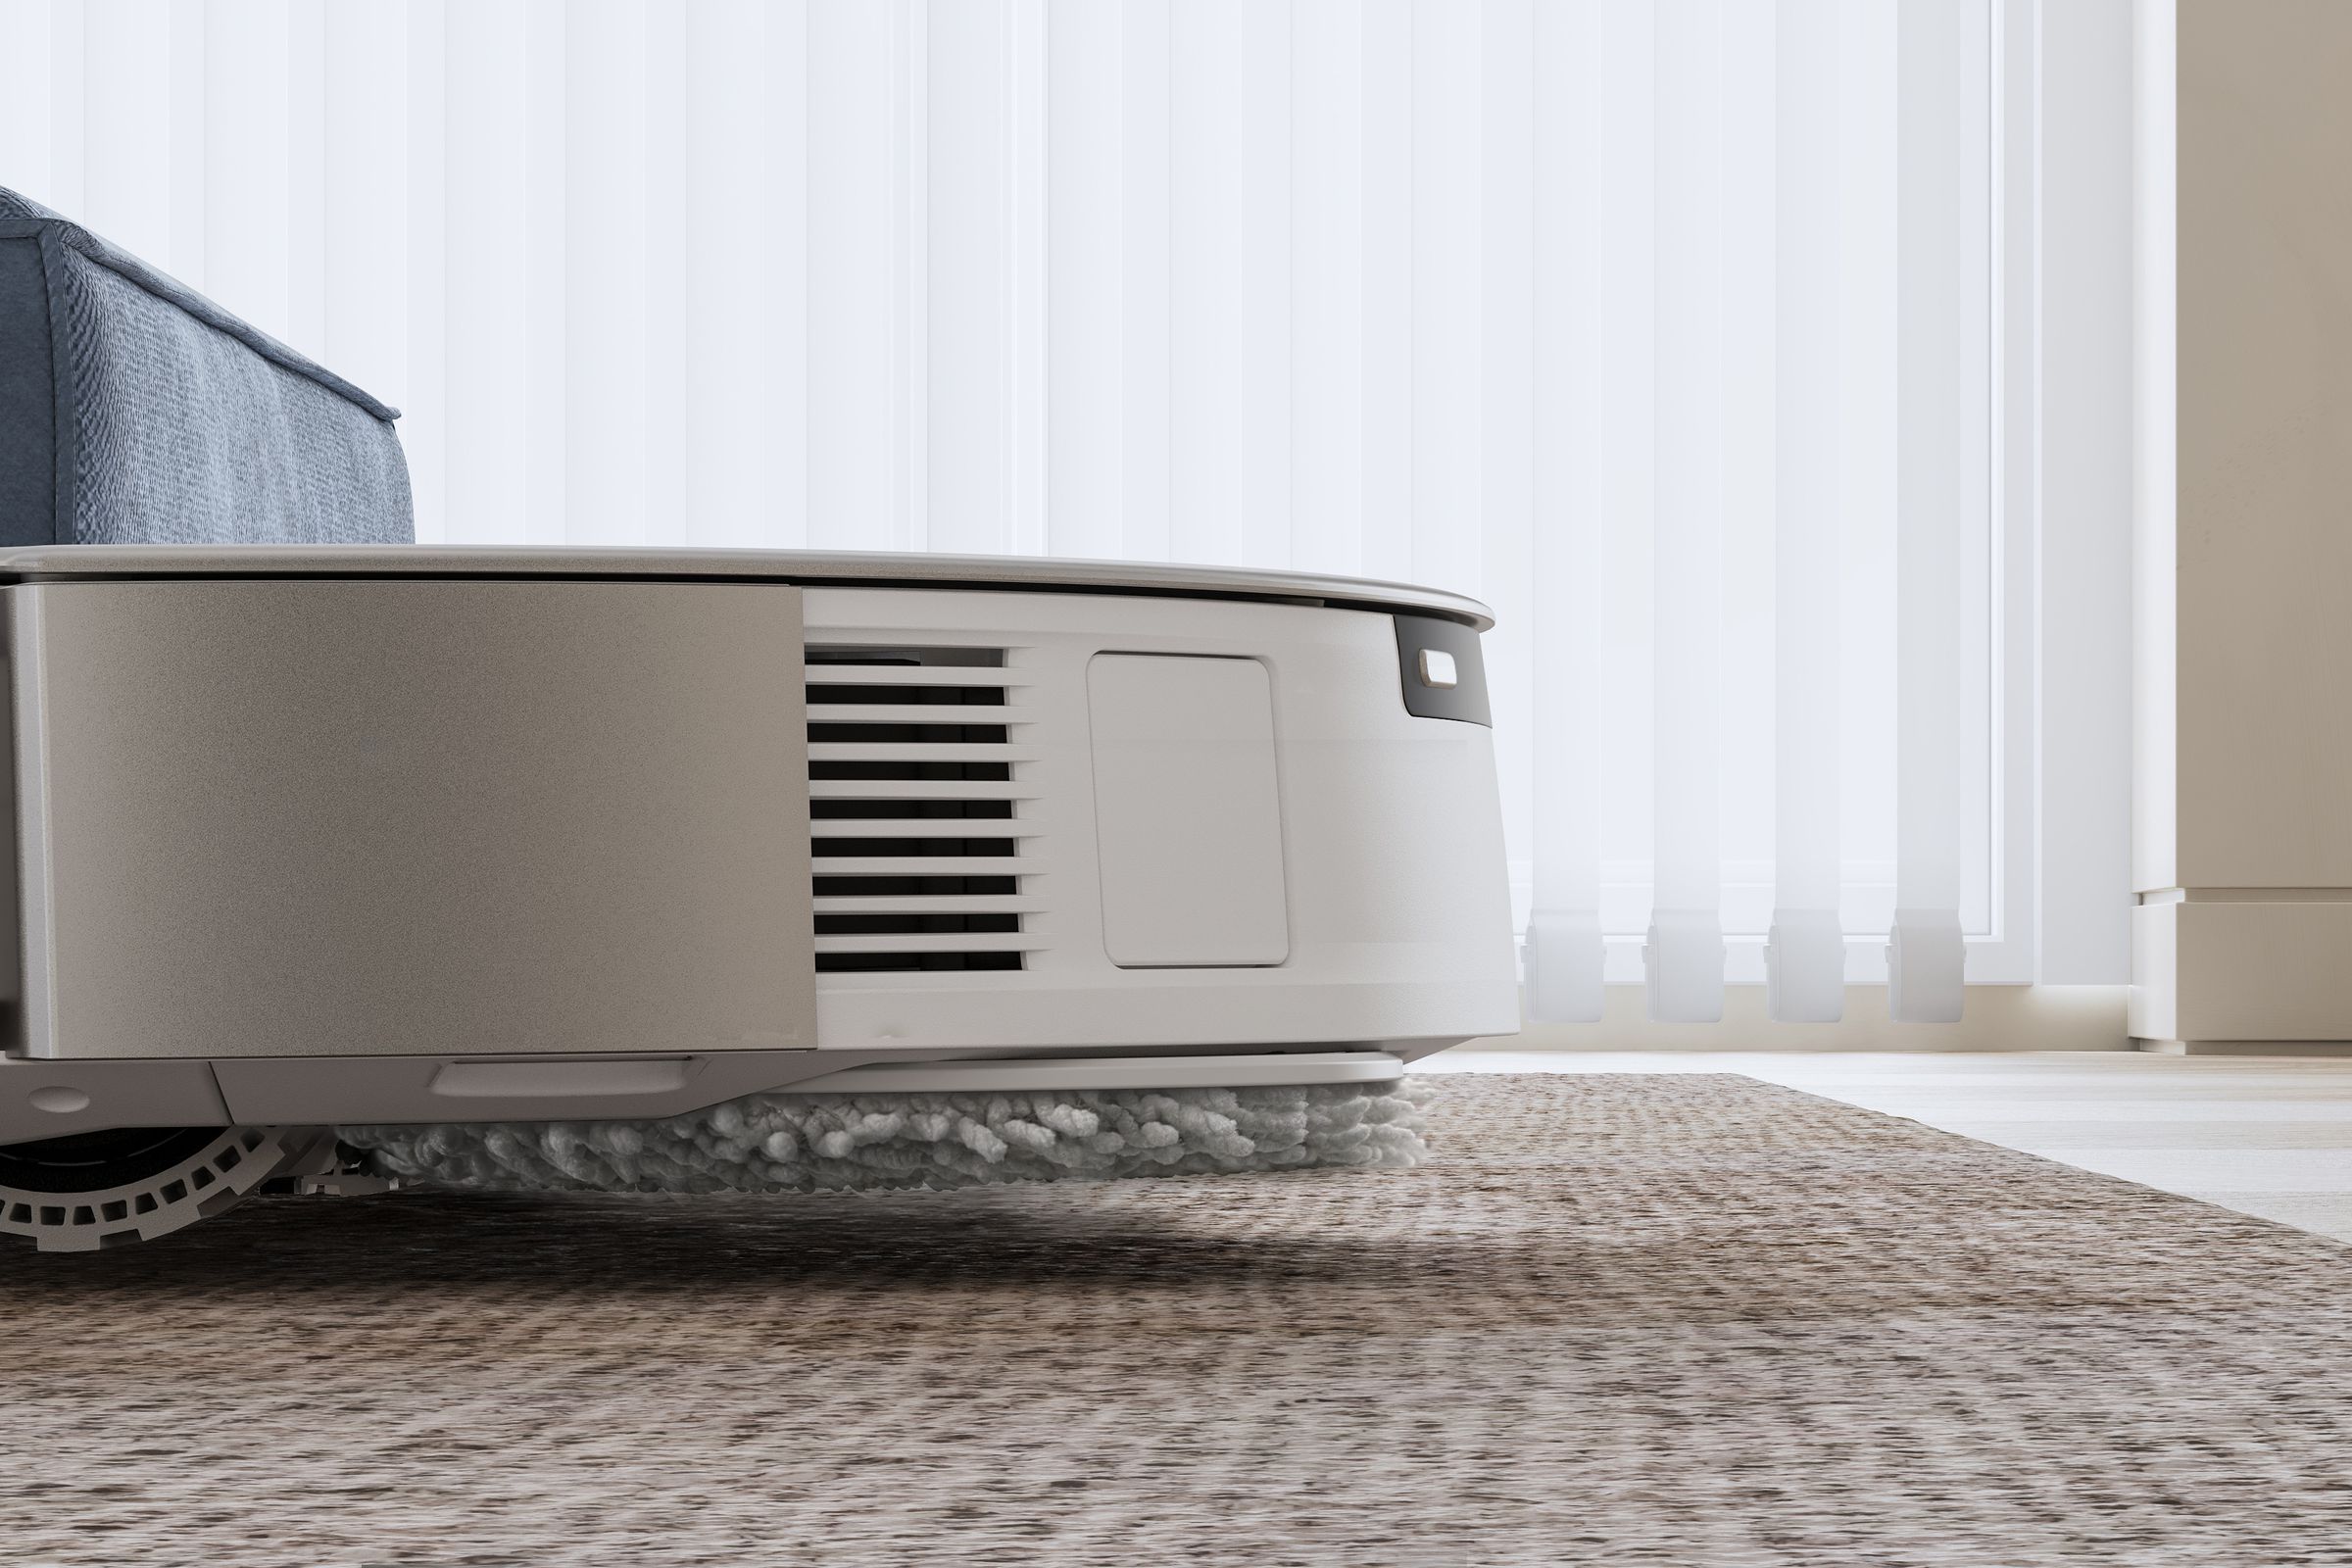 The latest robot vacuums have new tricks, like this Ecovacs model that lifts its mop 9mm off the floor.